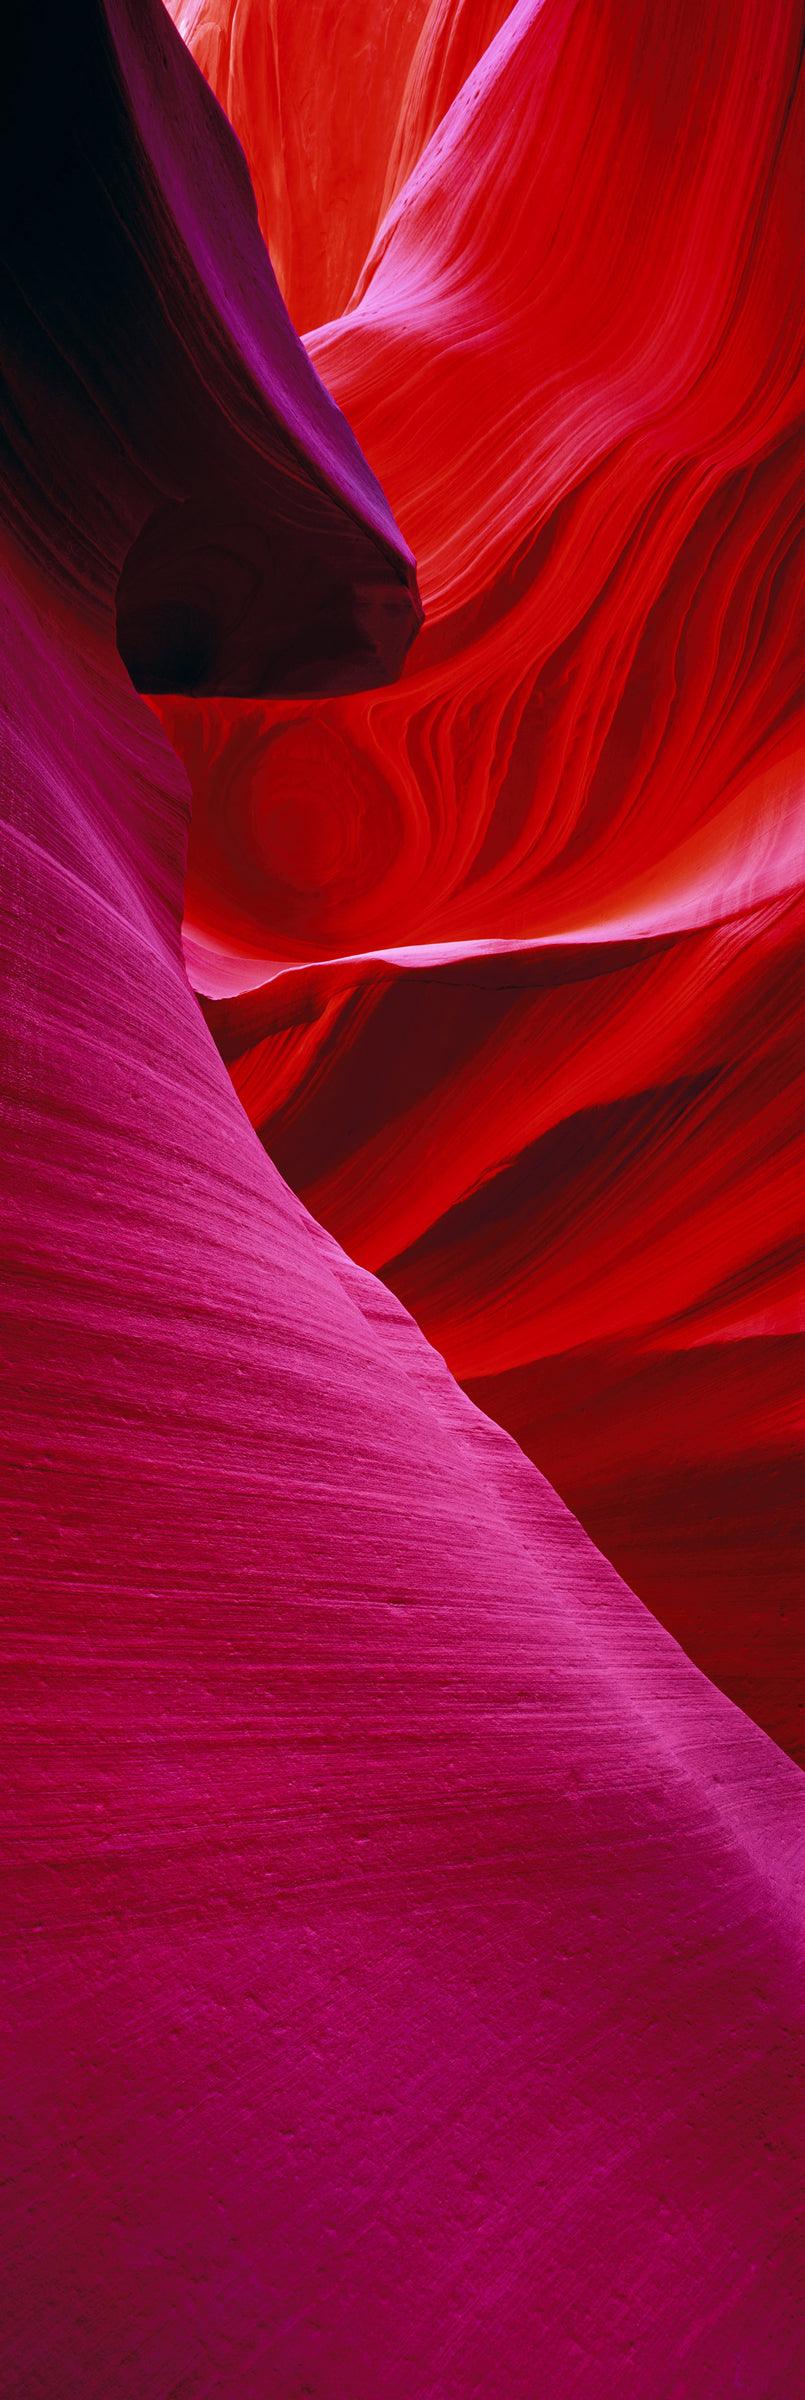 Red and pink sandstone walls of the slot canyons in Antelope Canyon Arizona